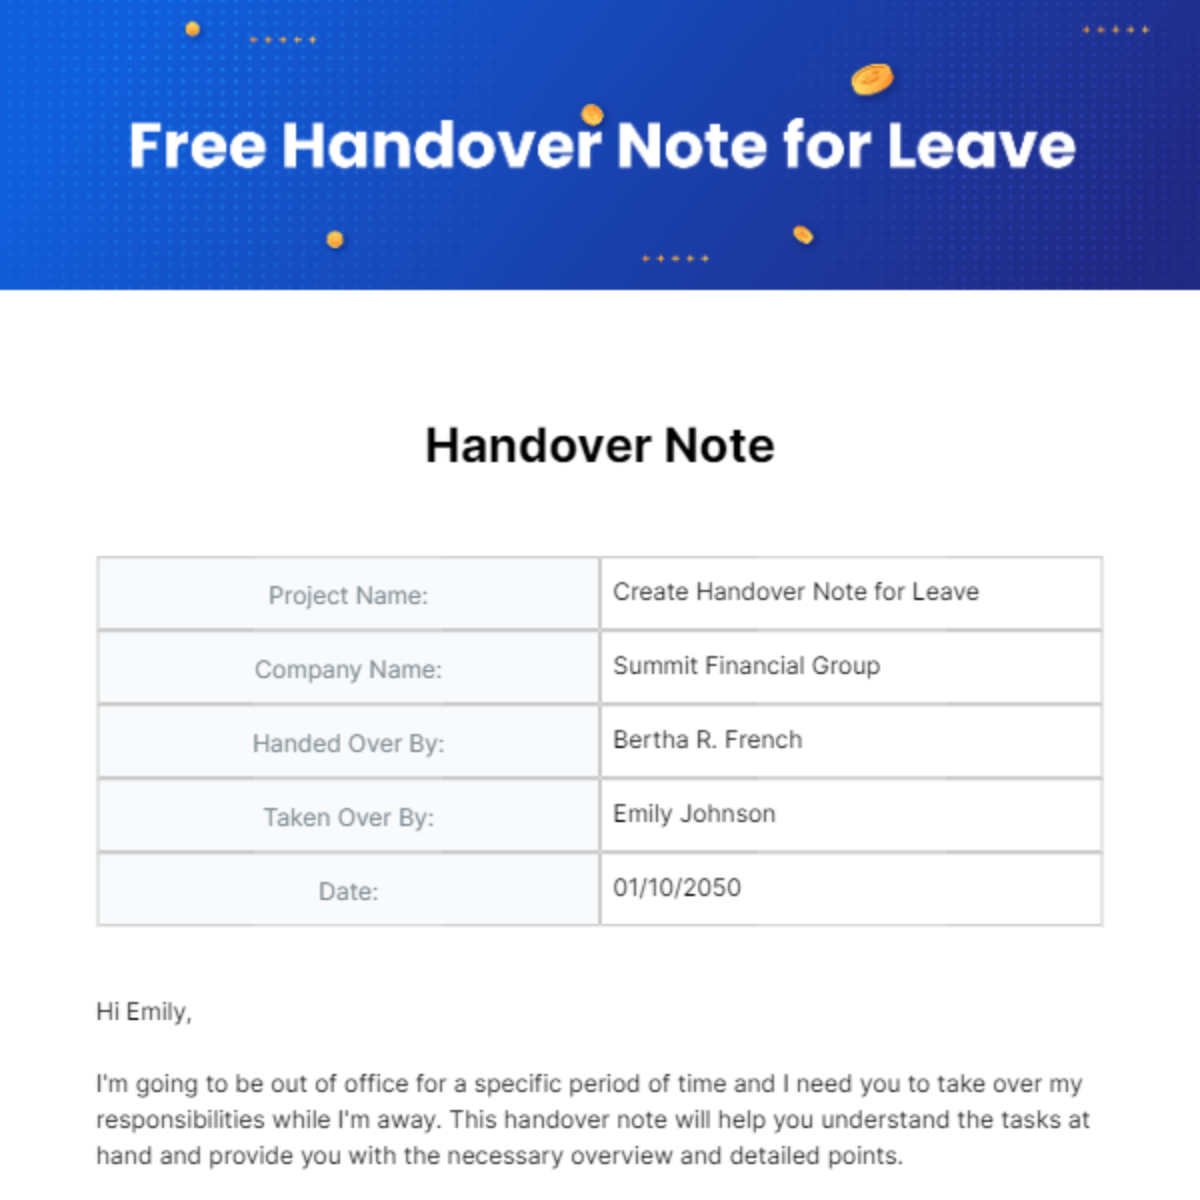 Free Handover Note for Leave Template